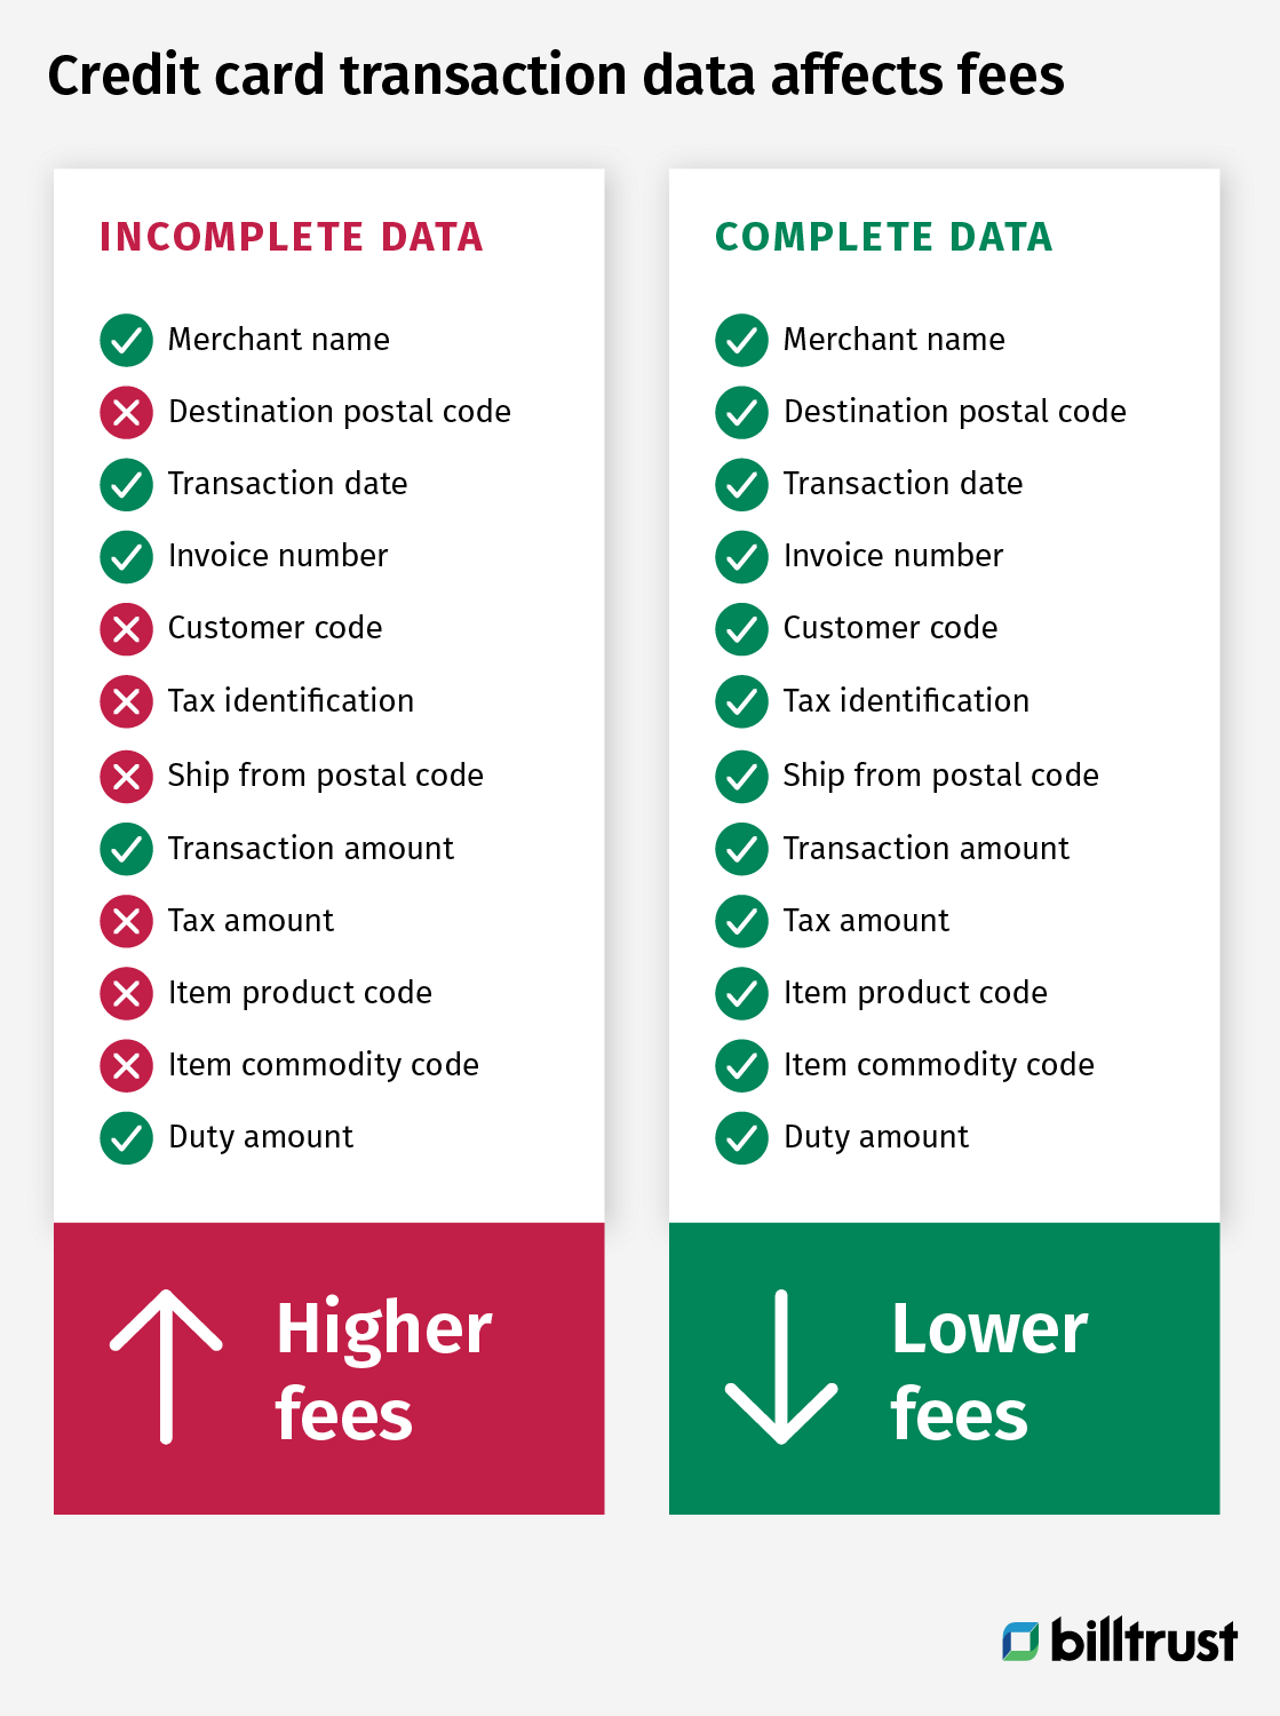 Impact of incomplete and complete data on credit card transaction fees